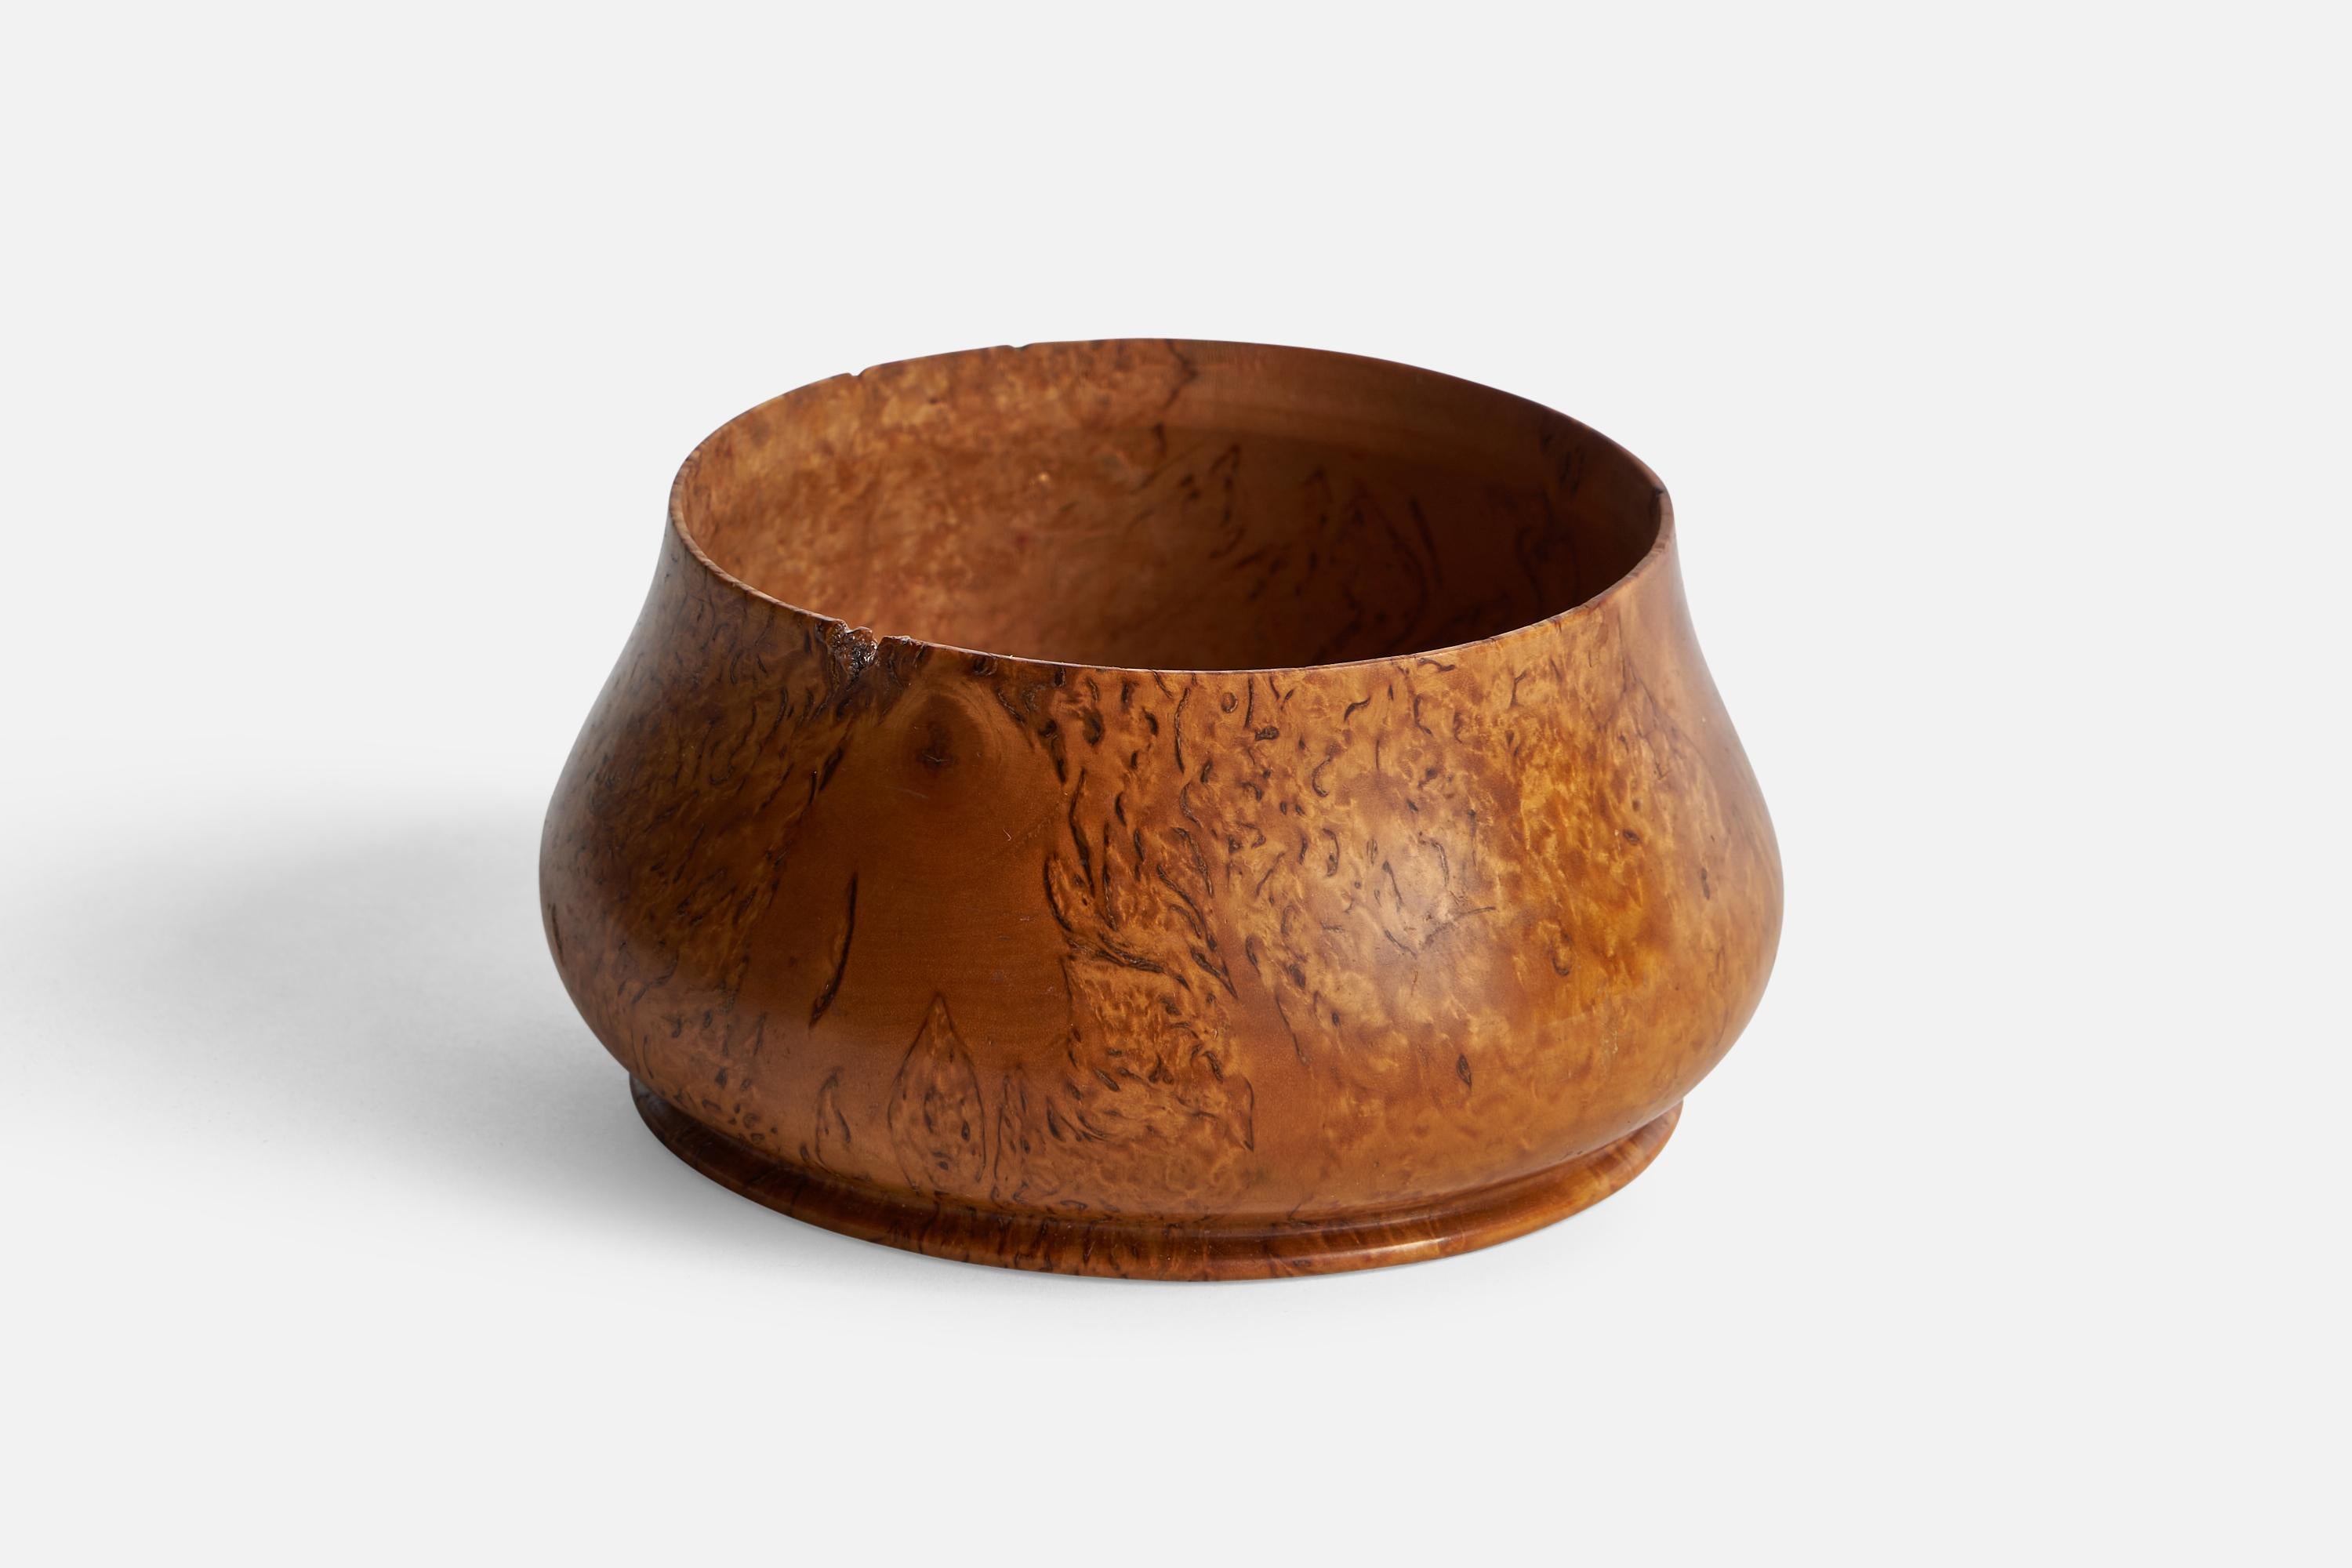 A small masur birch bowl designed and produced in Sweden, c. 1920s.